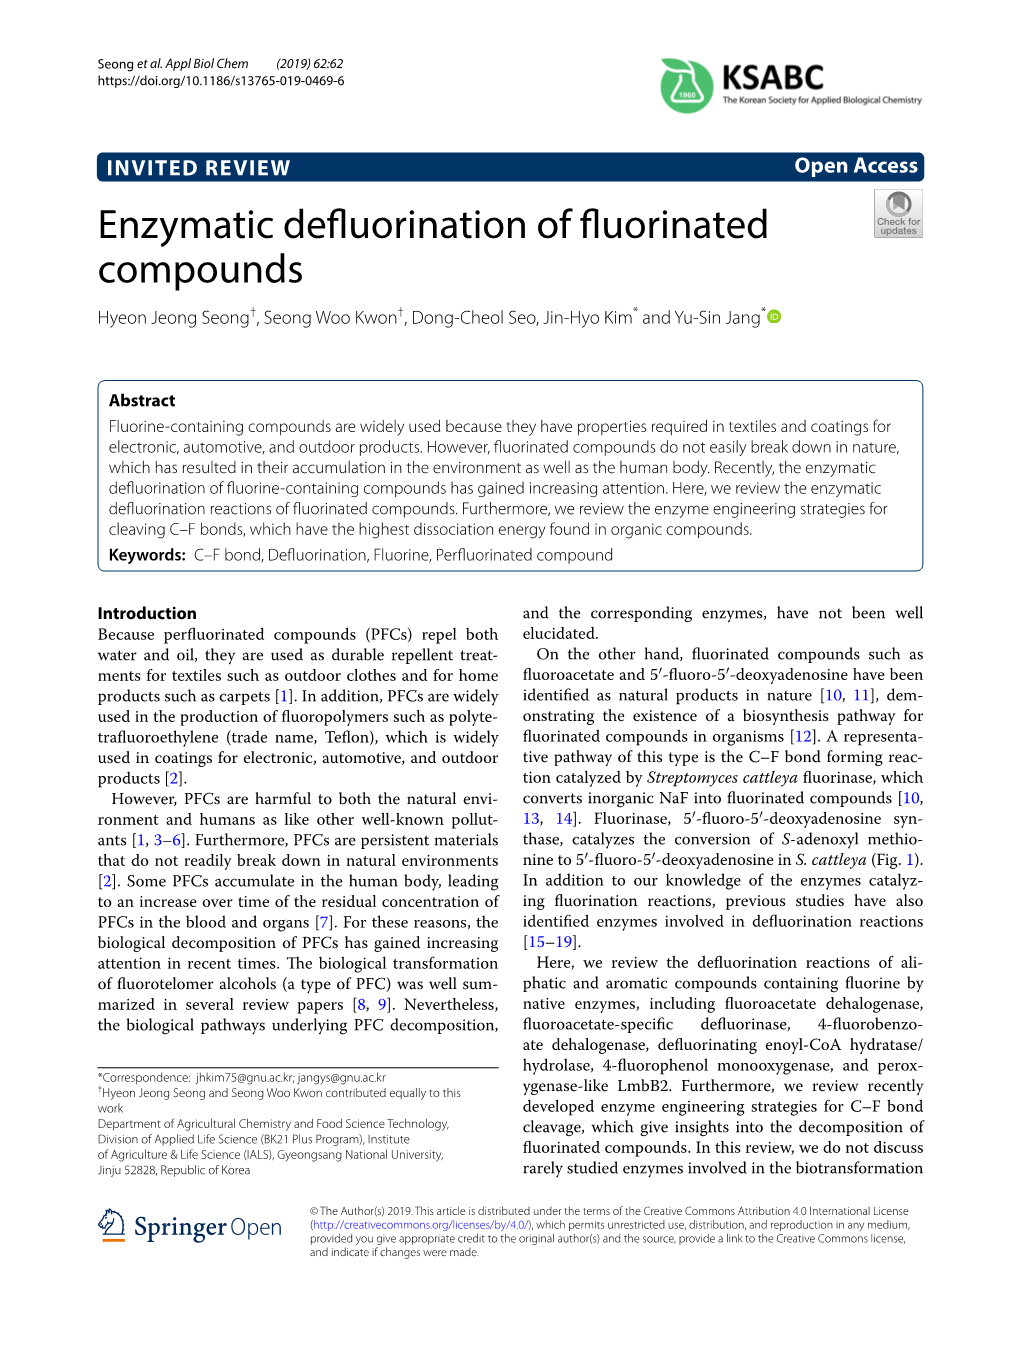 Enzymatic Defluorination of Fluorinated Compounds